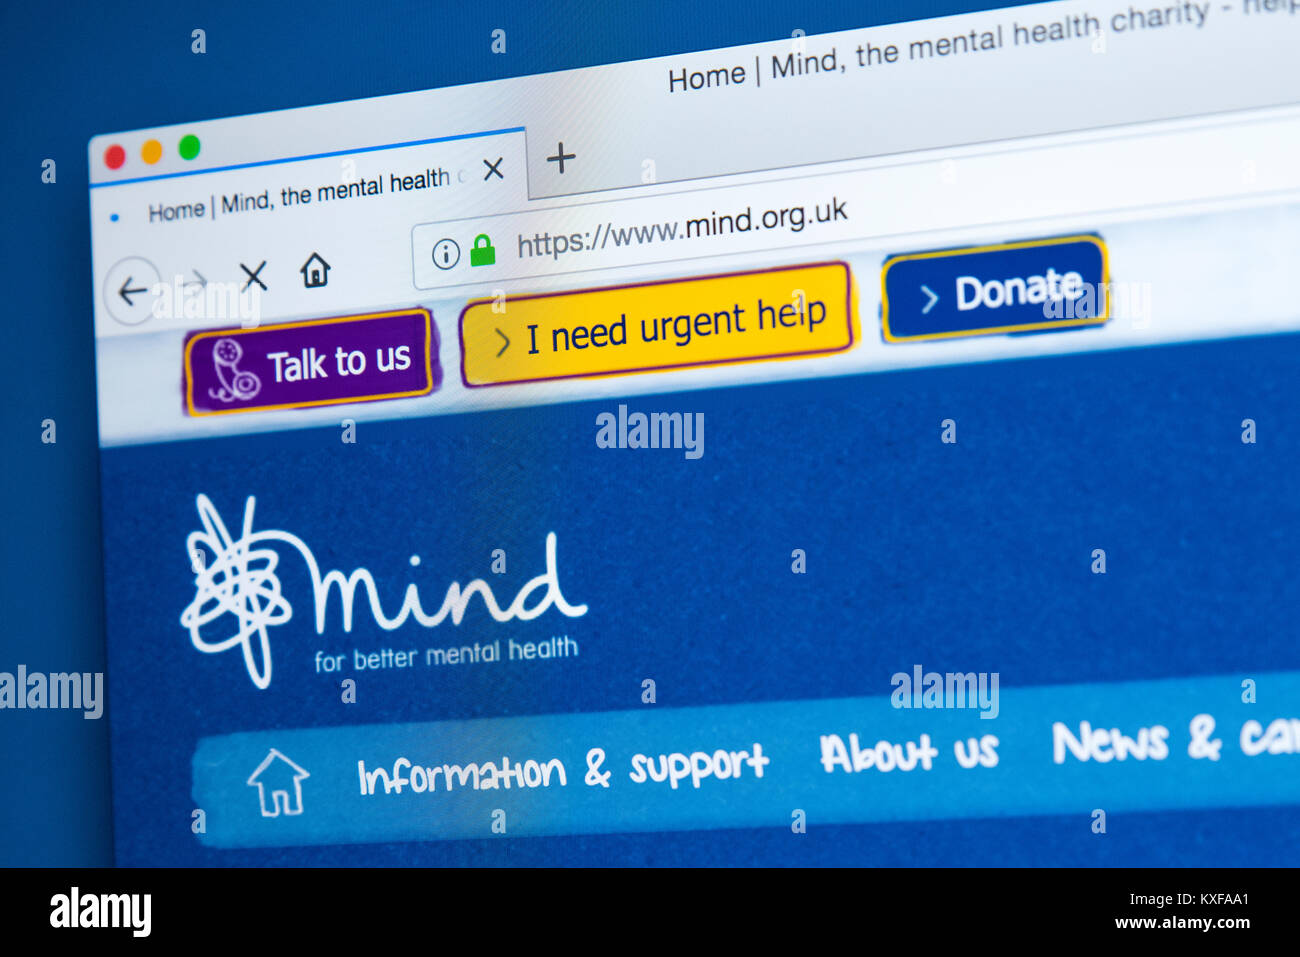 LONDON, UK - JANUARY 4TH 2018: The homepage of the official website for Mind - the mental health charity, on 4th January 2018. Stock Photo